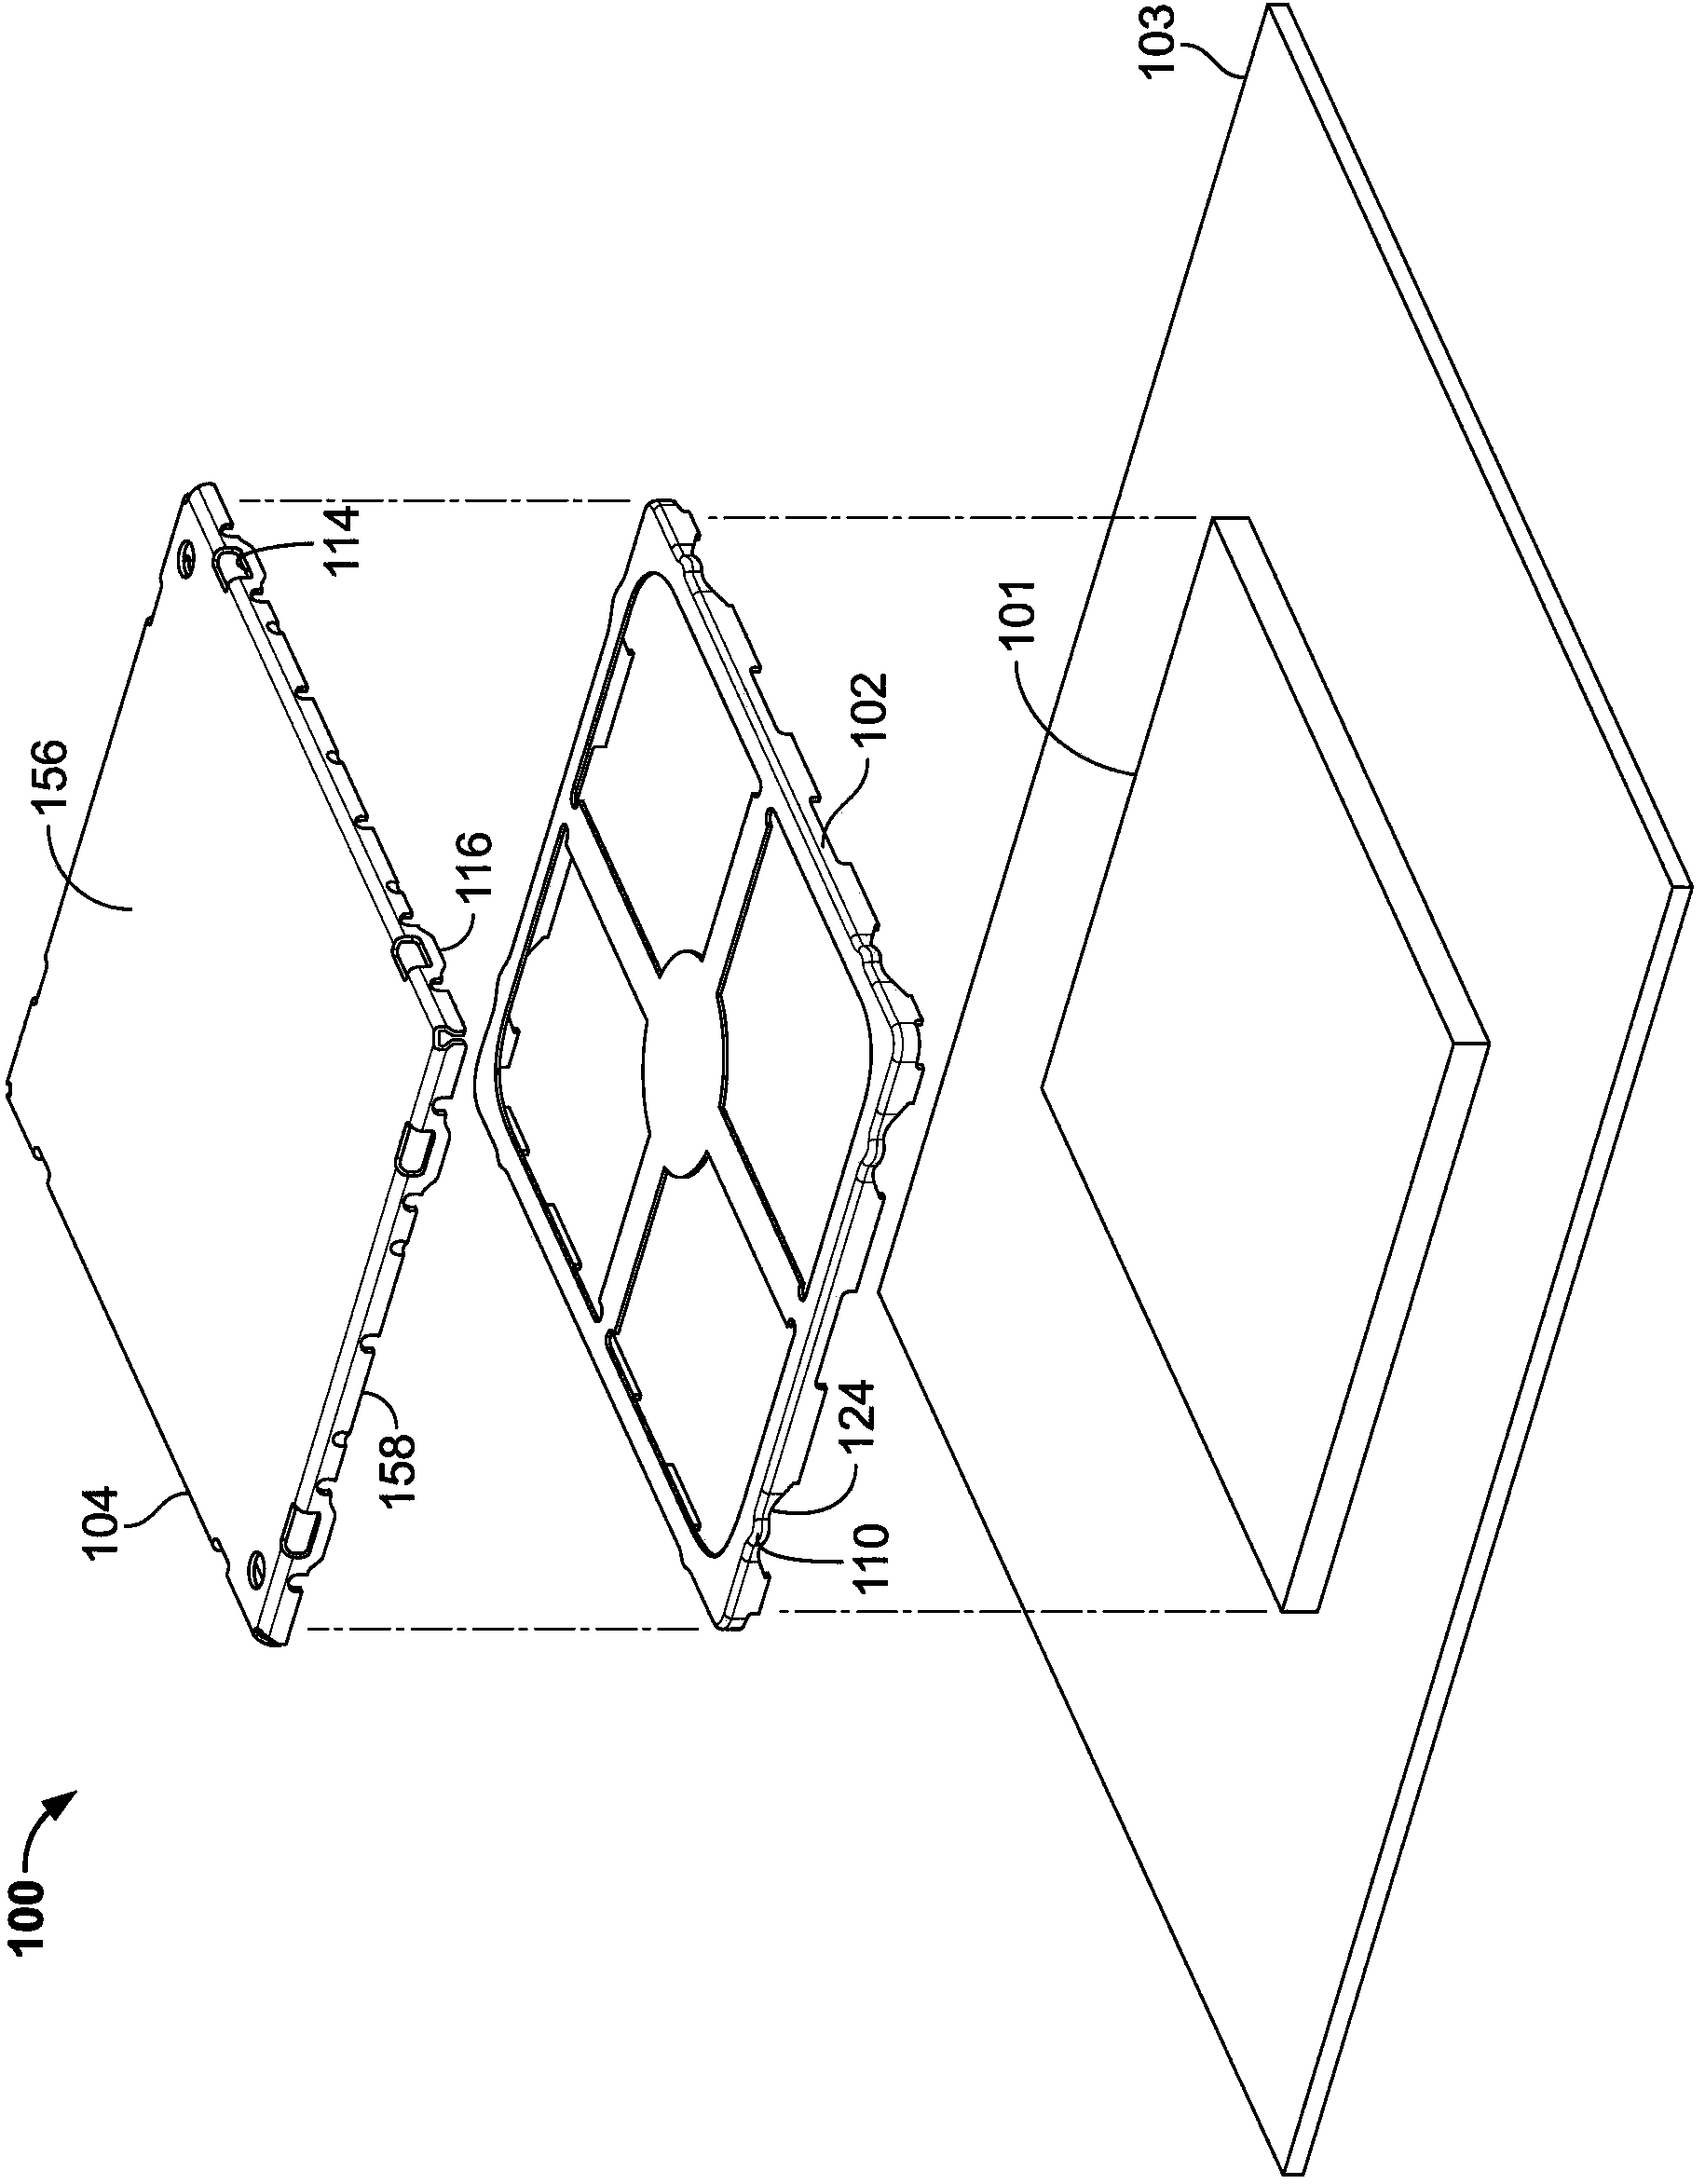 Electromagnetic Interference Shielding Apparatus Including A Frame With Drawn Latching Features